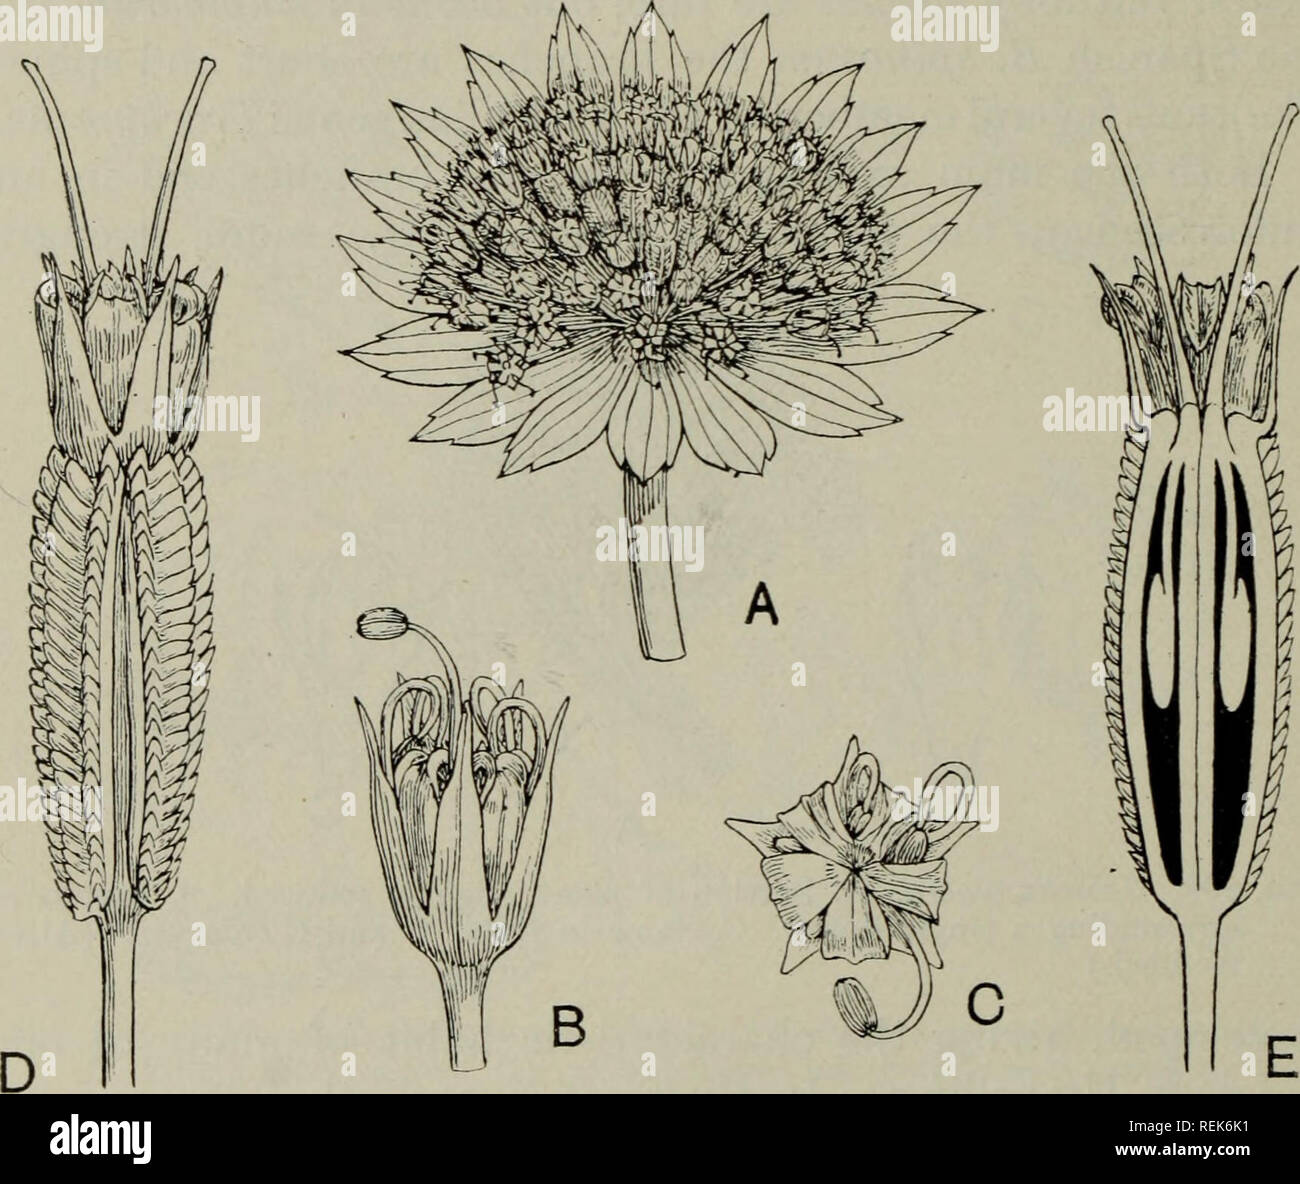 . The classification of flowering plants. Plants. 414 rLOWERING PLANTS Hydrocotyle (fig. 202) dindi Astrantia (fig. 204)); very rarely is the umbel reduced to a single flower as in species of Hydrocotyle, and Azorella (fig. 203). In Eryngium (fig. 205) the flowers are crowded into dense heads surrounded by a whorl of rigid bracts; each flower is subtended by a bract. A terminal flower may be present, as in Carrot, where it differs from the rest in its form and purplish colour. The presence or. Fig. 204. Astrantia major. A. Inflorescence, slightly enlarged. B. Male flower, X 7. C. Same viewed f Stock Photo